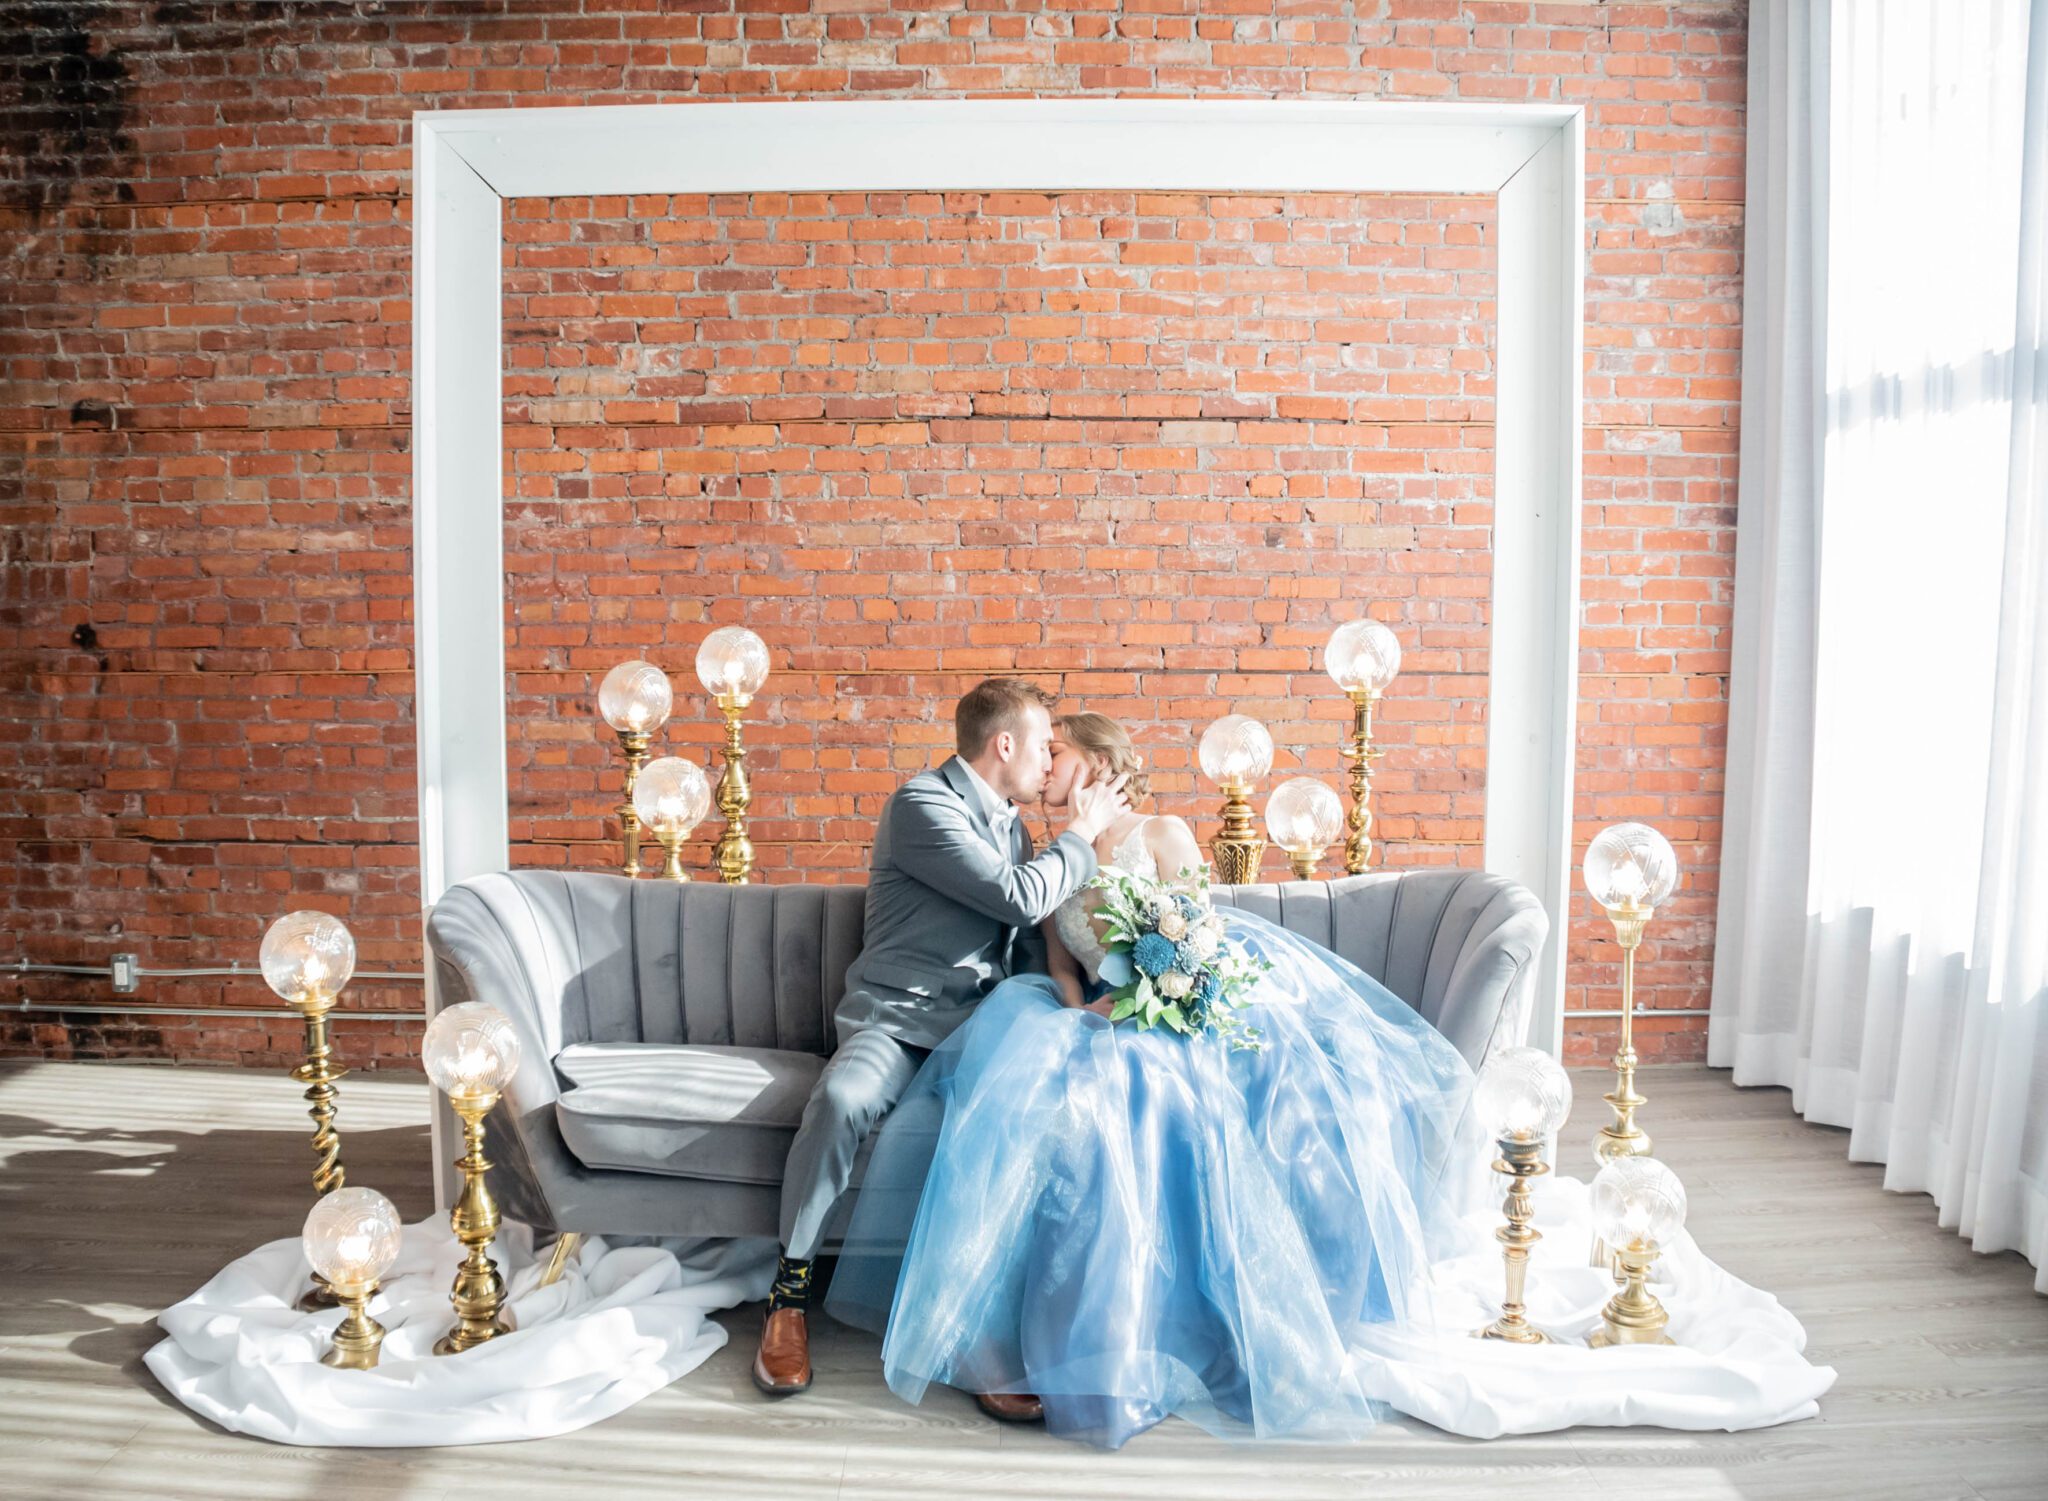 Vintage lighting surrounds bride and groom sharing intimate moment on a grey velvet couch in a unique Calgary, Alberta wedding venue, groom is wearing a timeless and traditional grey suit, bride is holding large bouquet full of blue, peach and white blooms